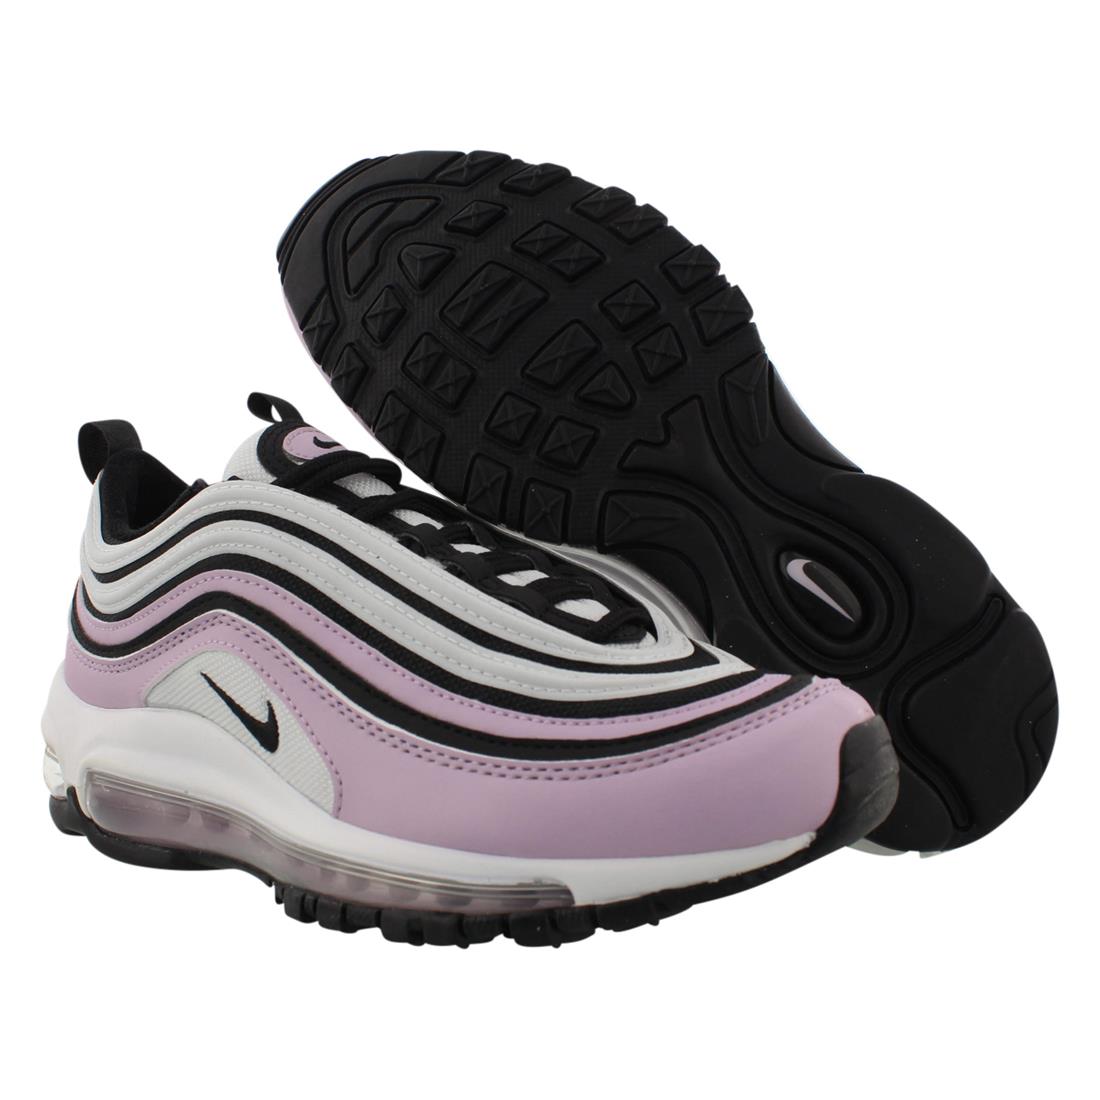 Nike shoes  - Iced Lilac/Black/Photon Dust, Main: Pink 3